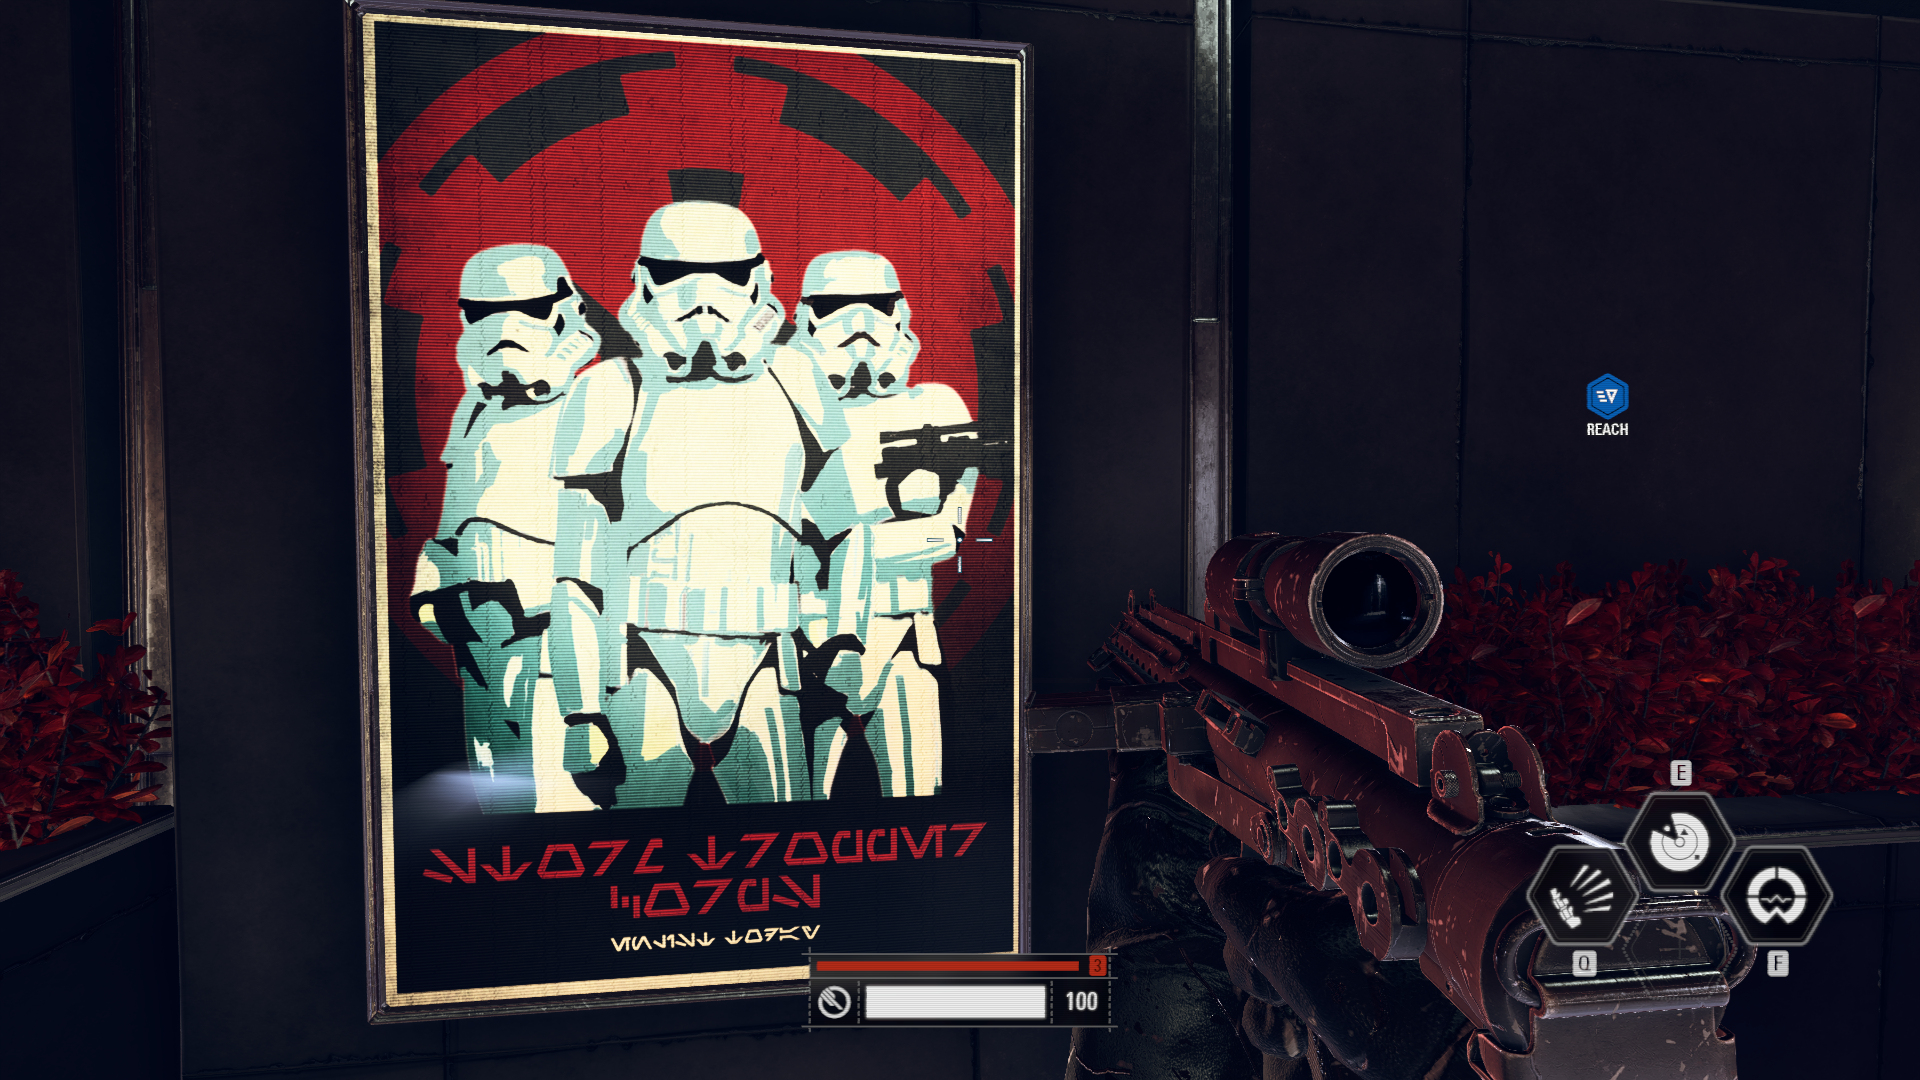 This Stormtrooper Corps propaganda in the Campaign misspelled Stormtrooper as Stormtropper in Aurebesh. This game is literally unplayable!